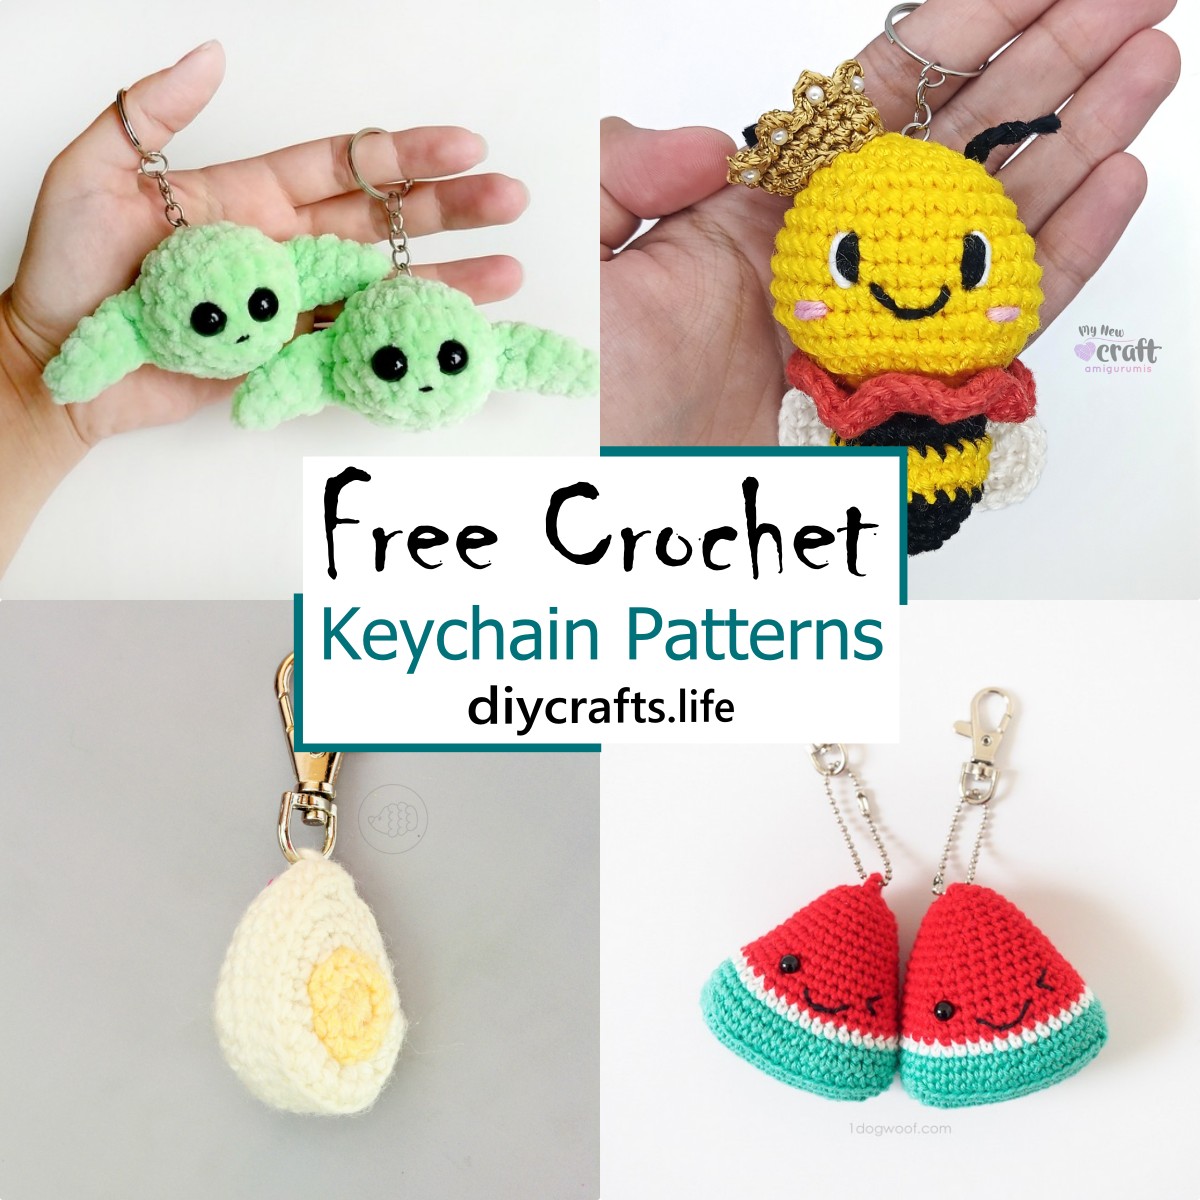 16 Crochet Keychain Patterns Free: Stylish And Functional - DIY Crafts